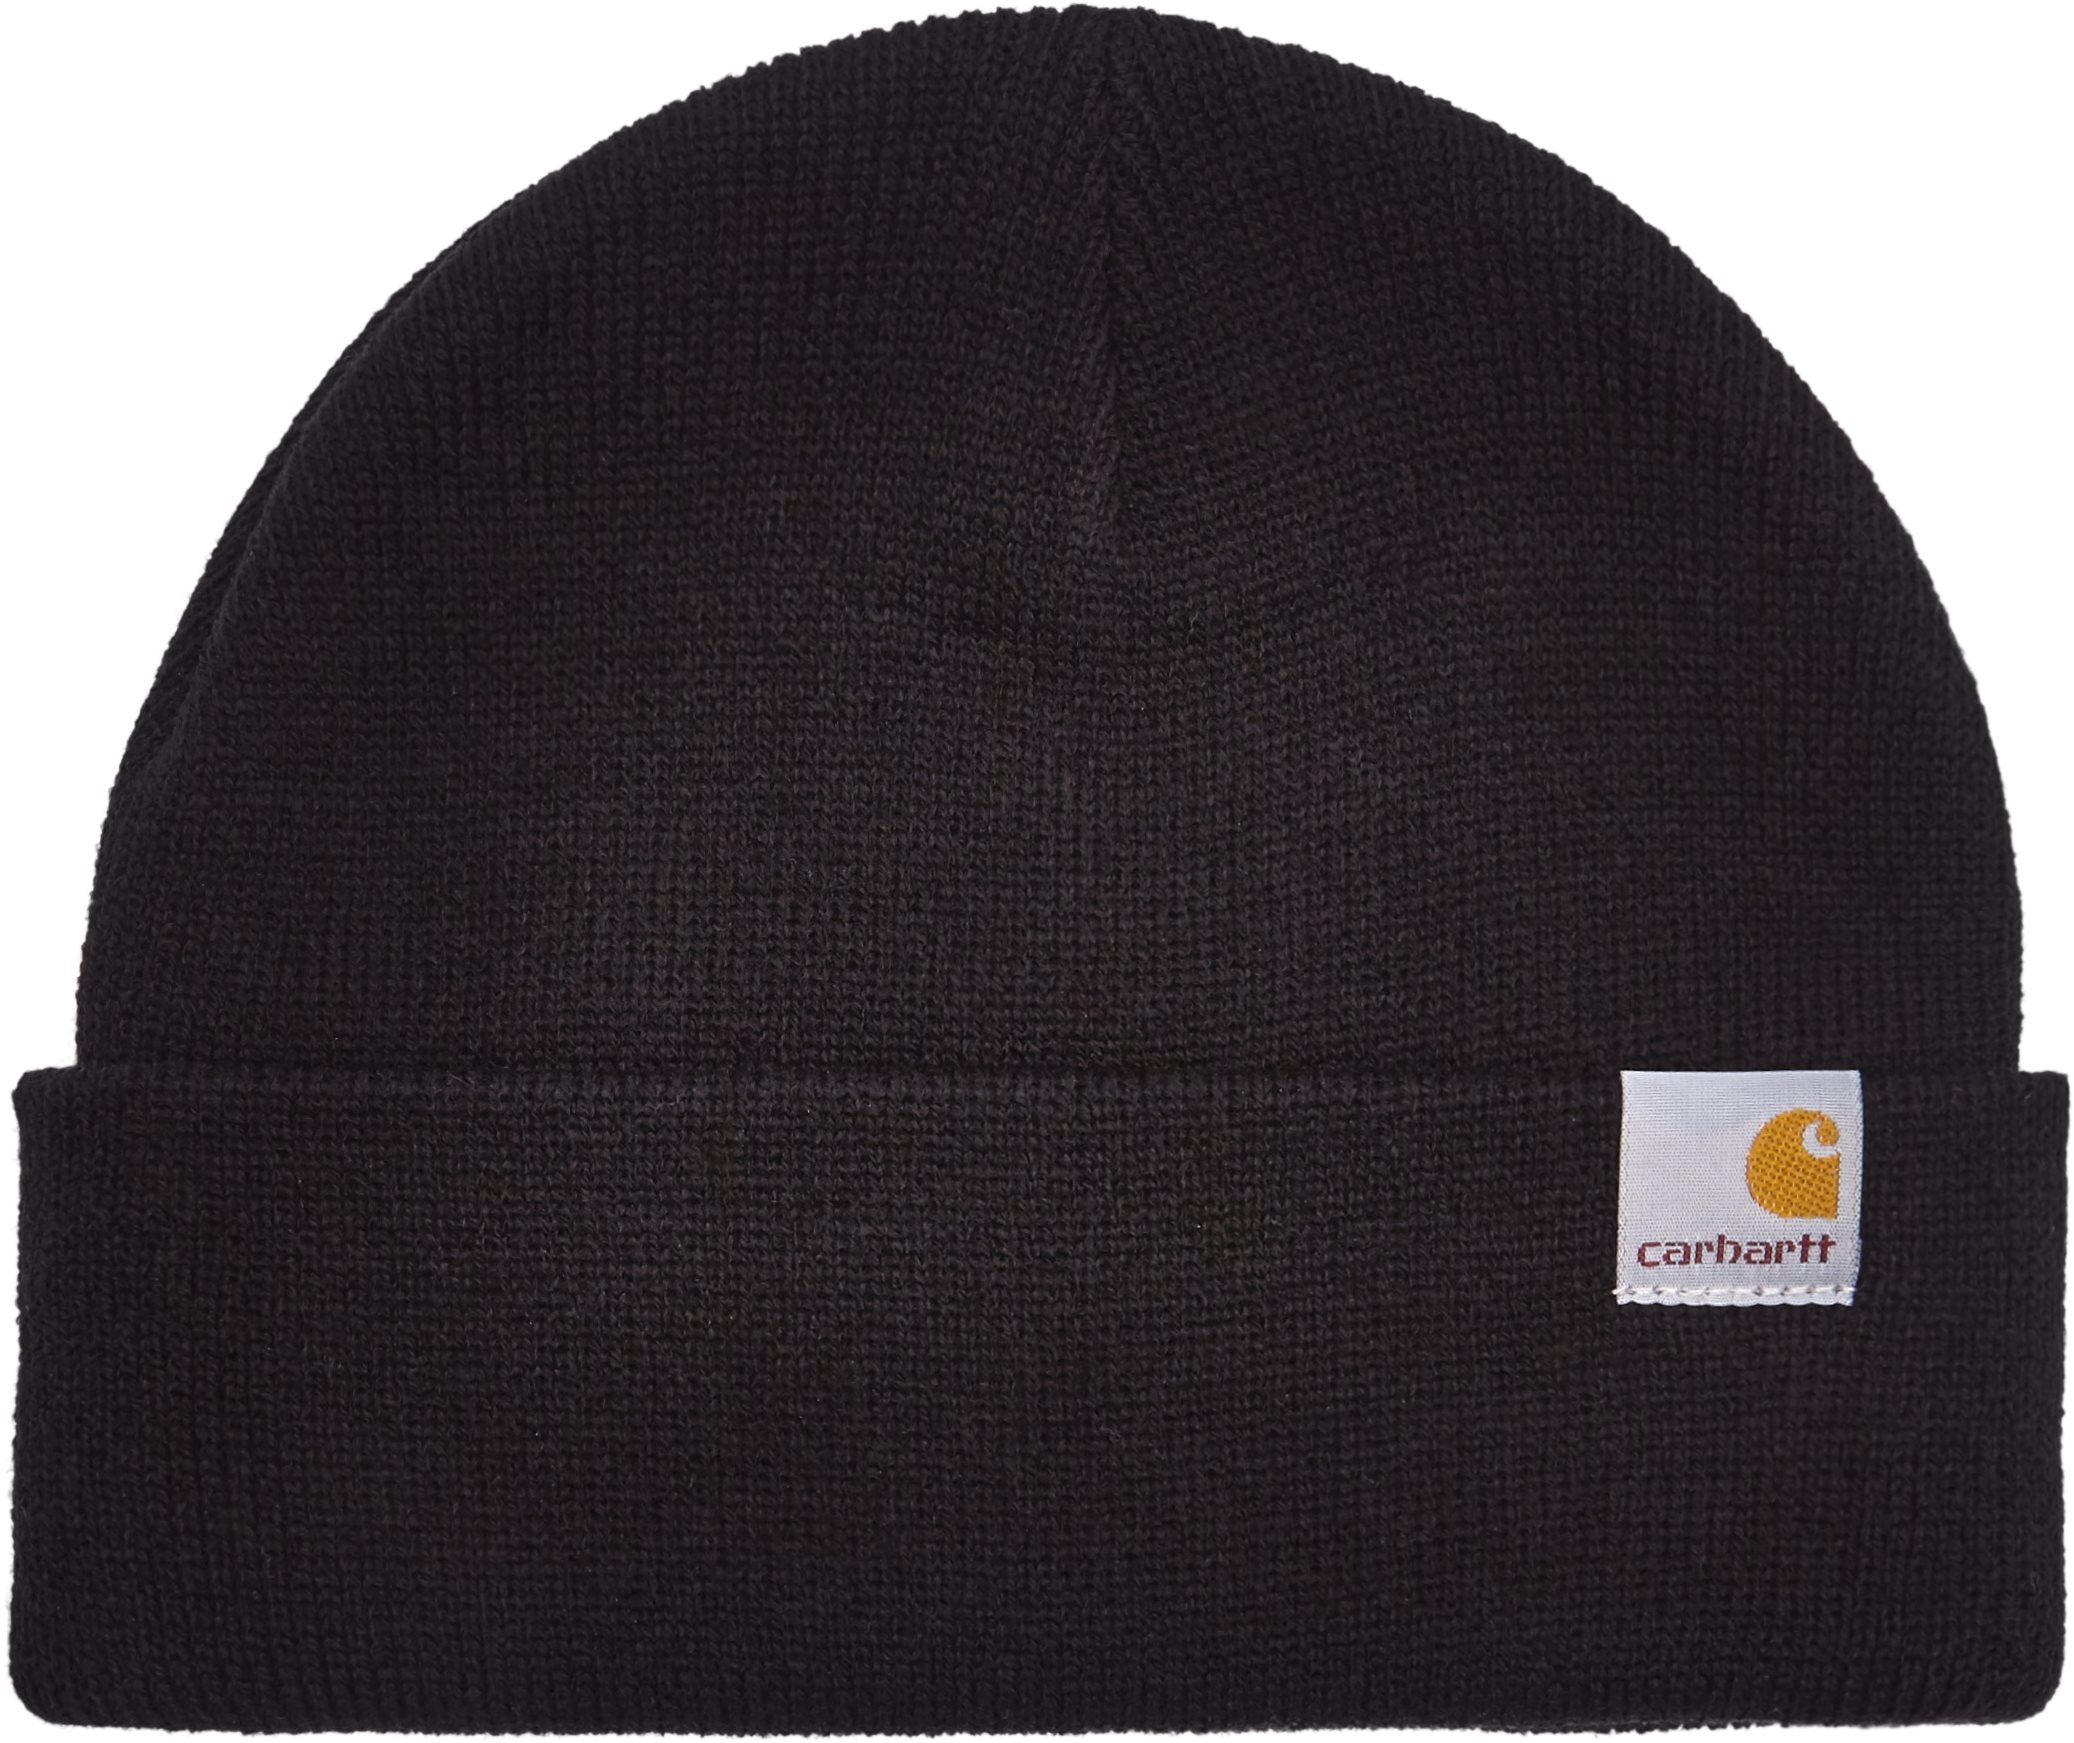 STRATUS HAT I025741. Beanies from Carhartt WIP EUR